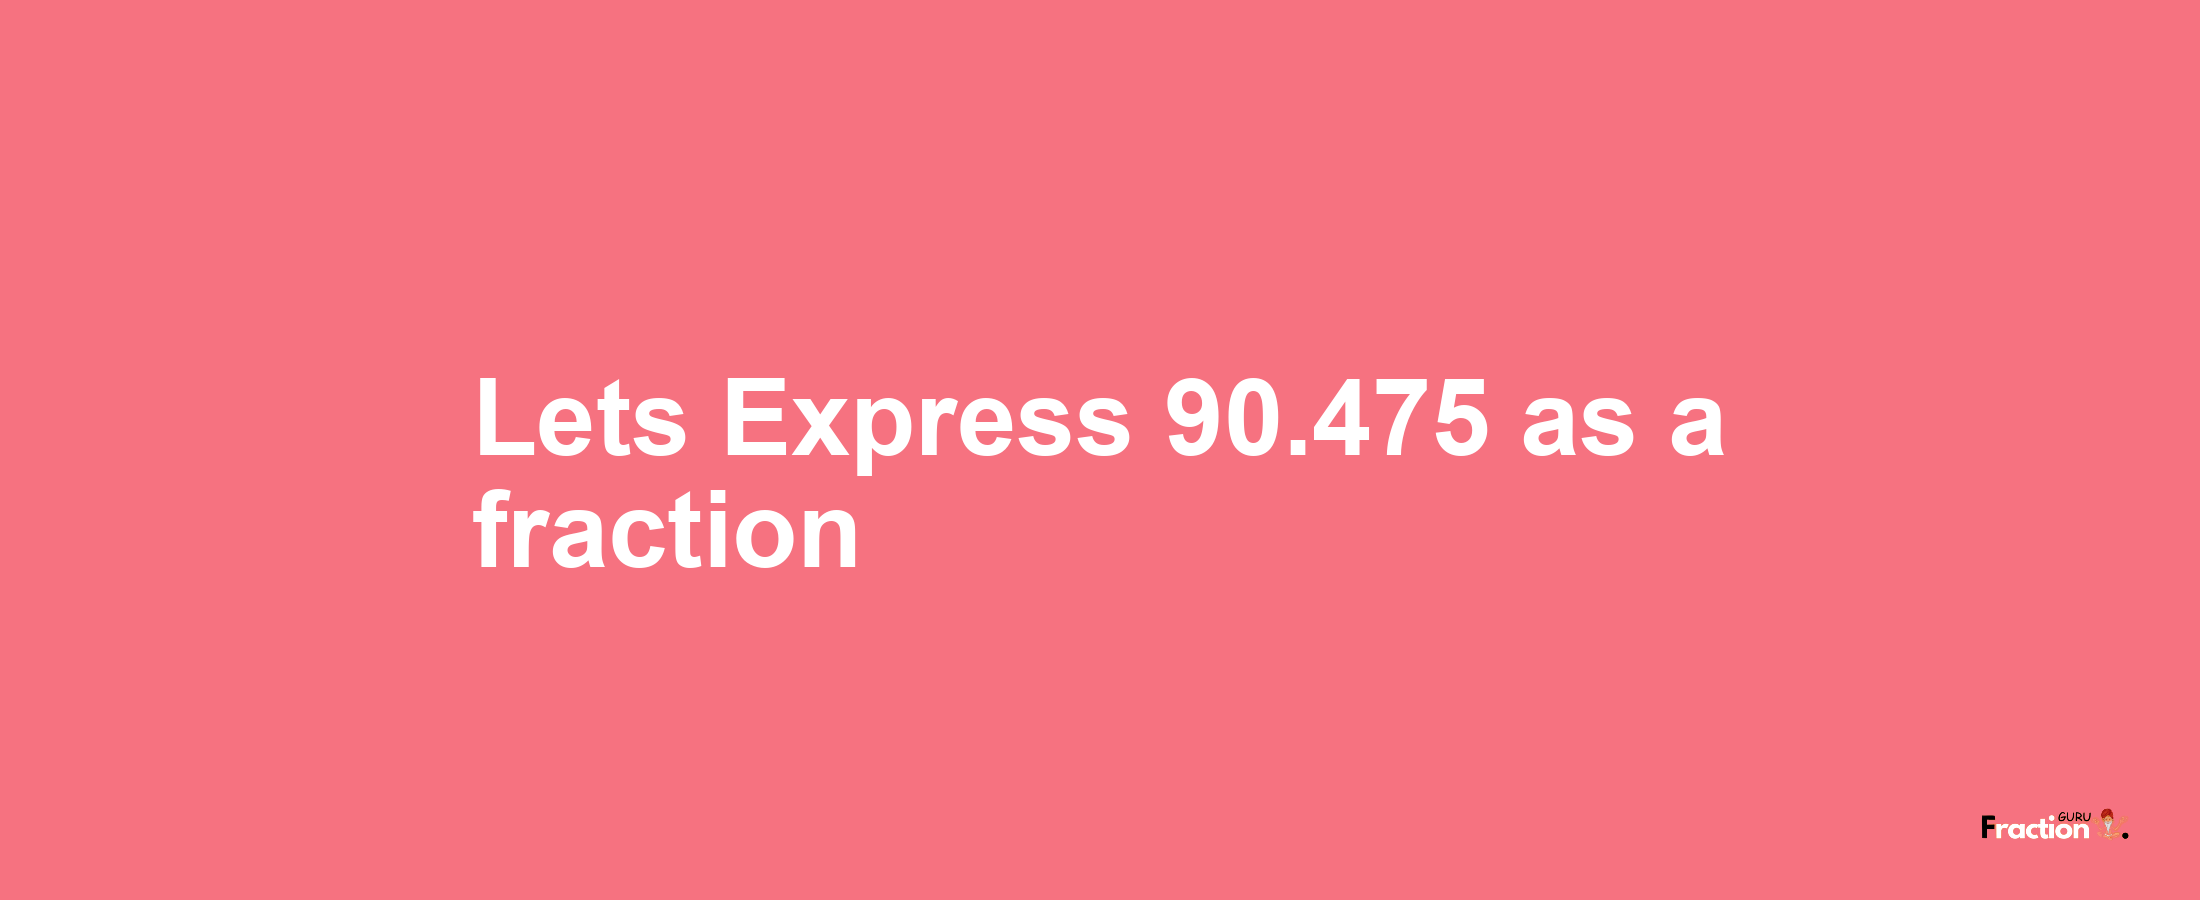 Lets Express 90.475 as afraction